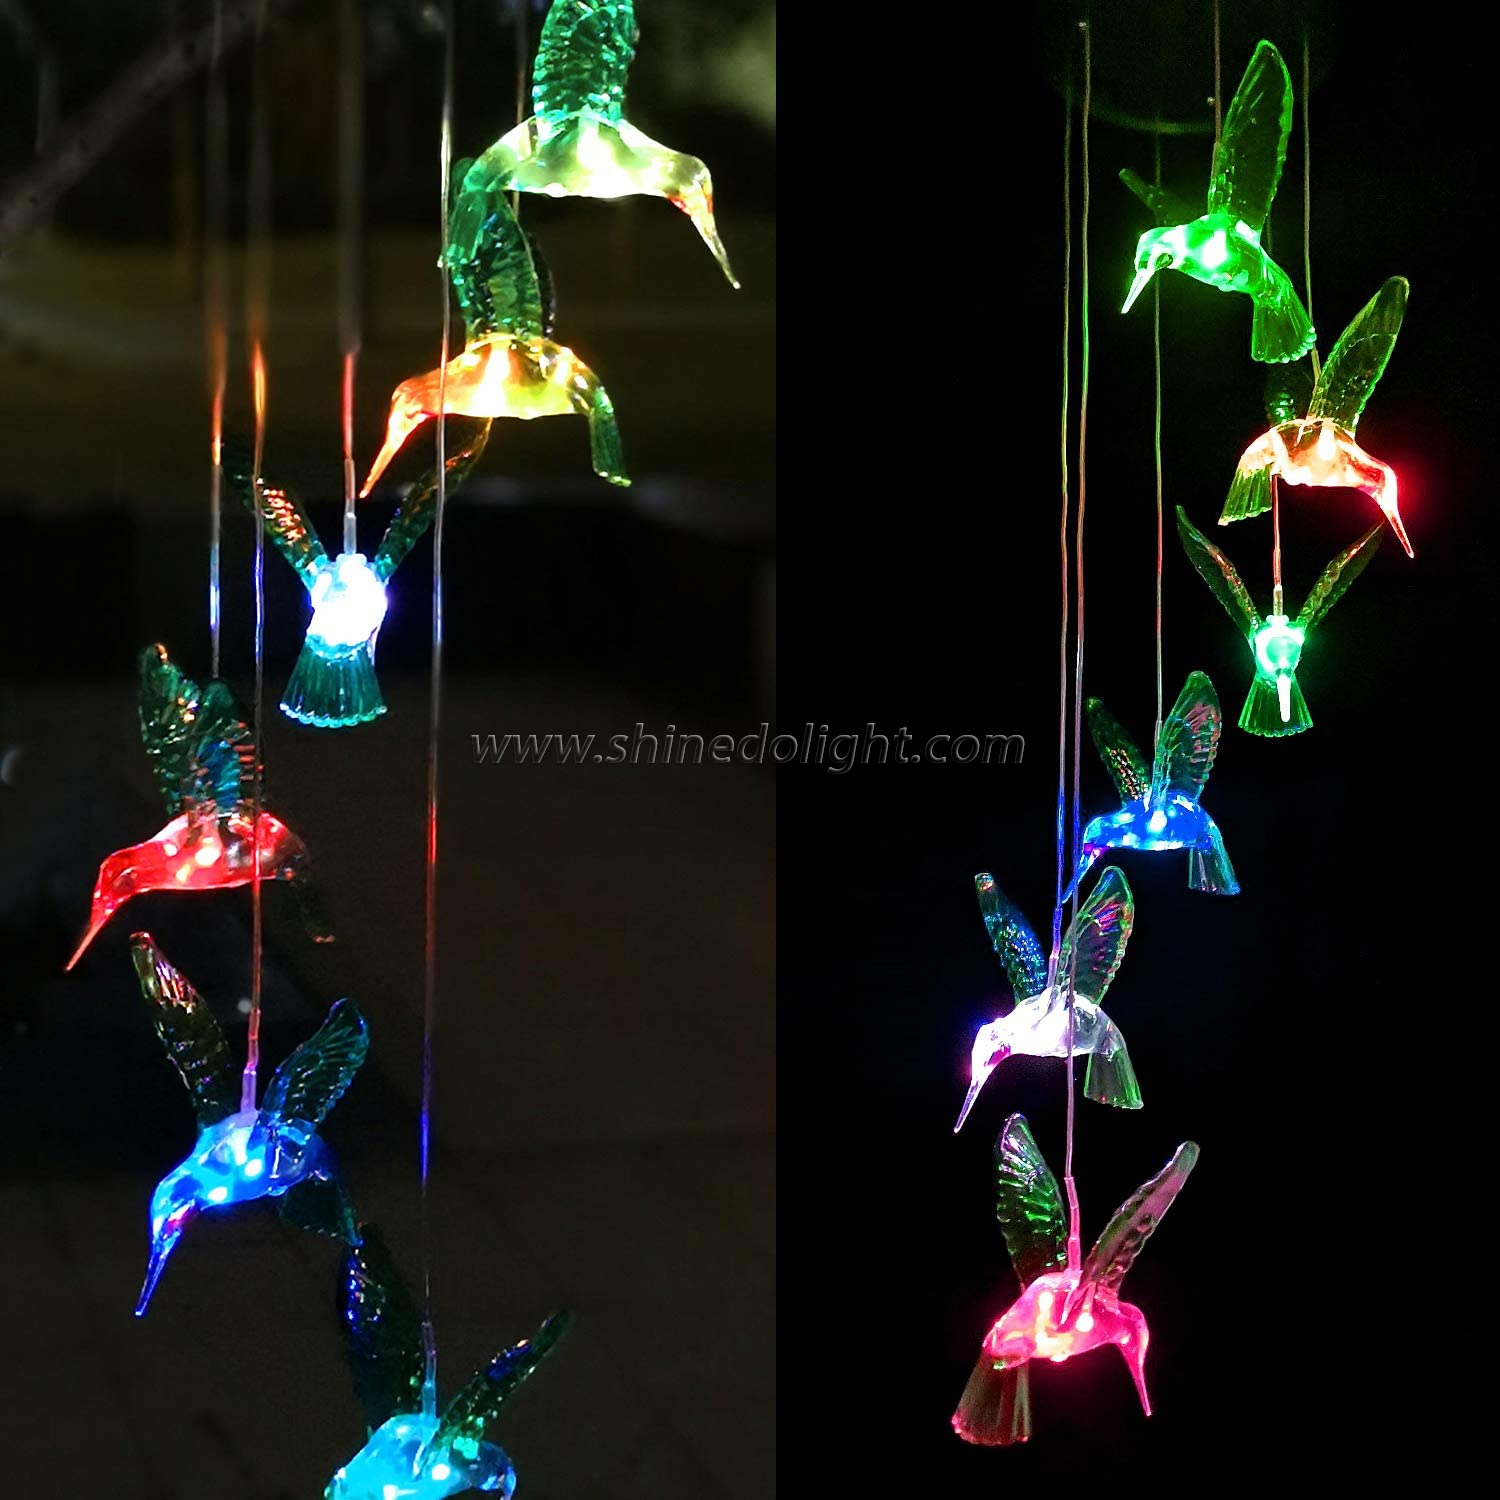 Hummingbird Solar Garden Wind Chime Outdoor Waterproof Color Changing LED Solar Wind Chime Decorative Solar Wind Chime For Gift